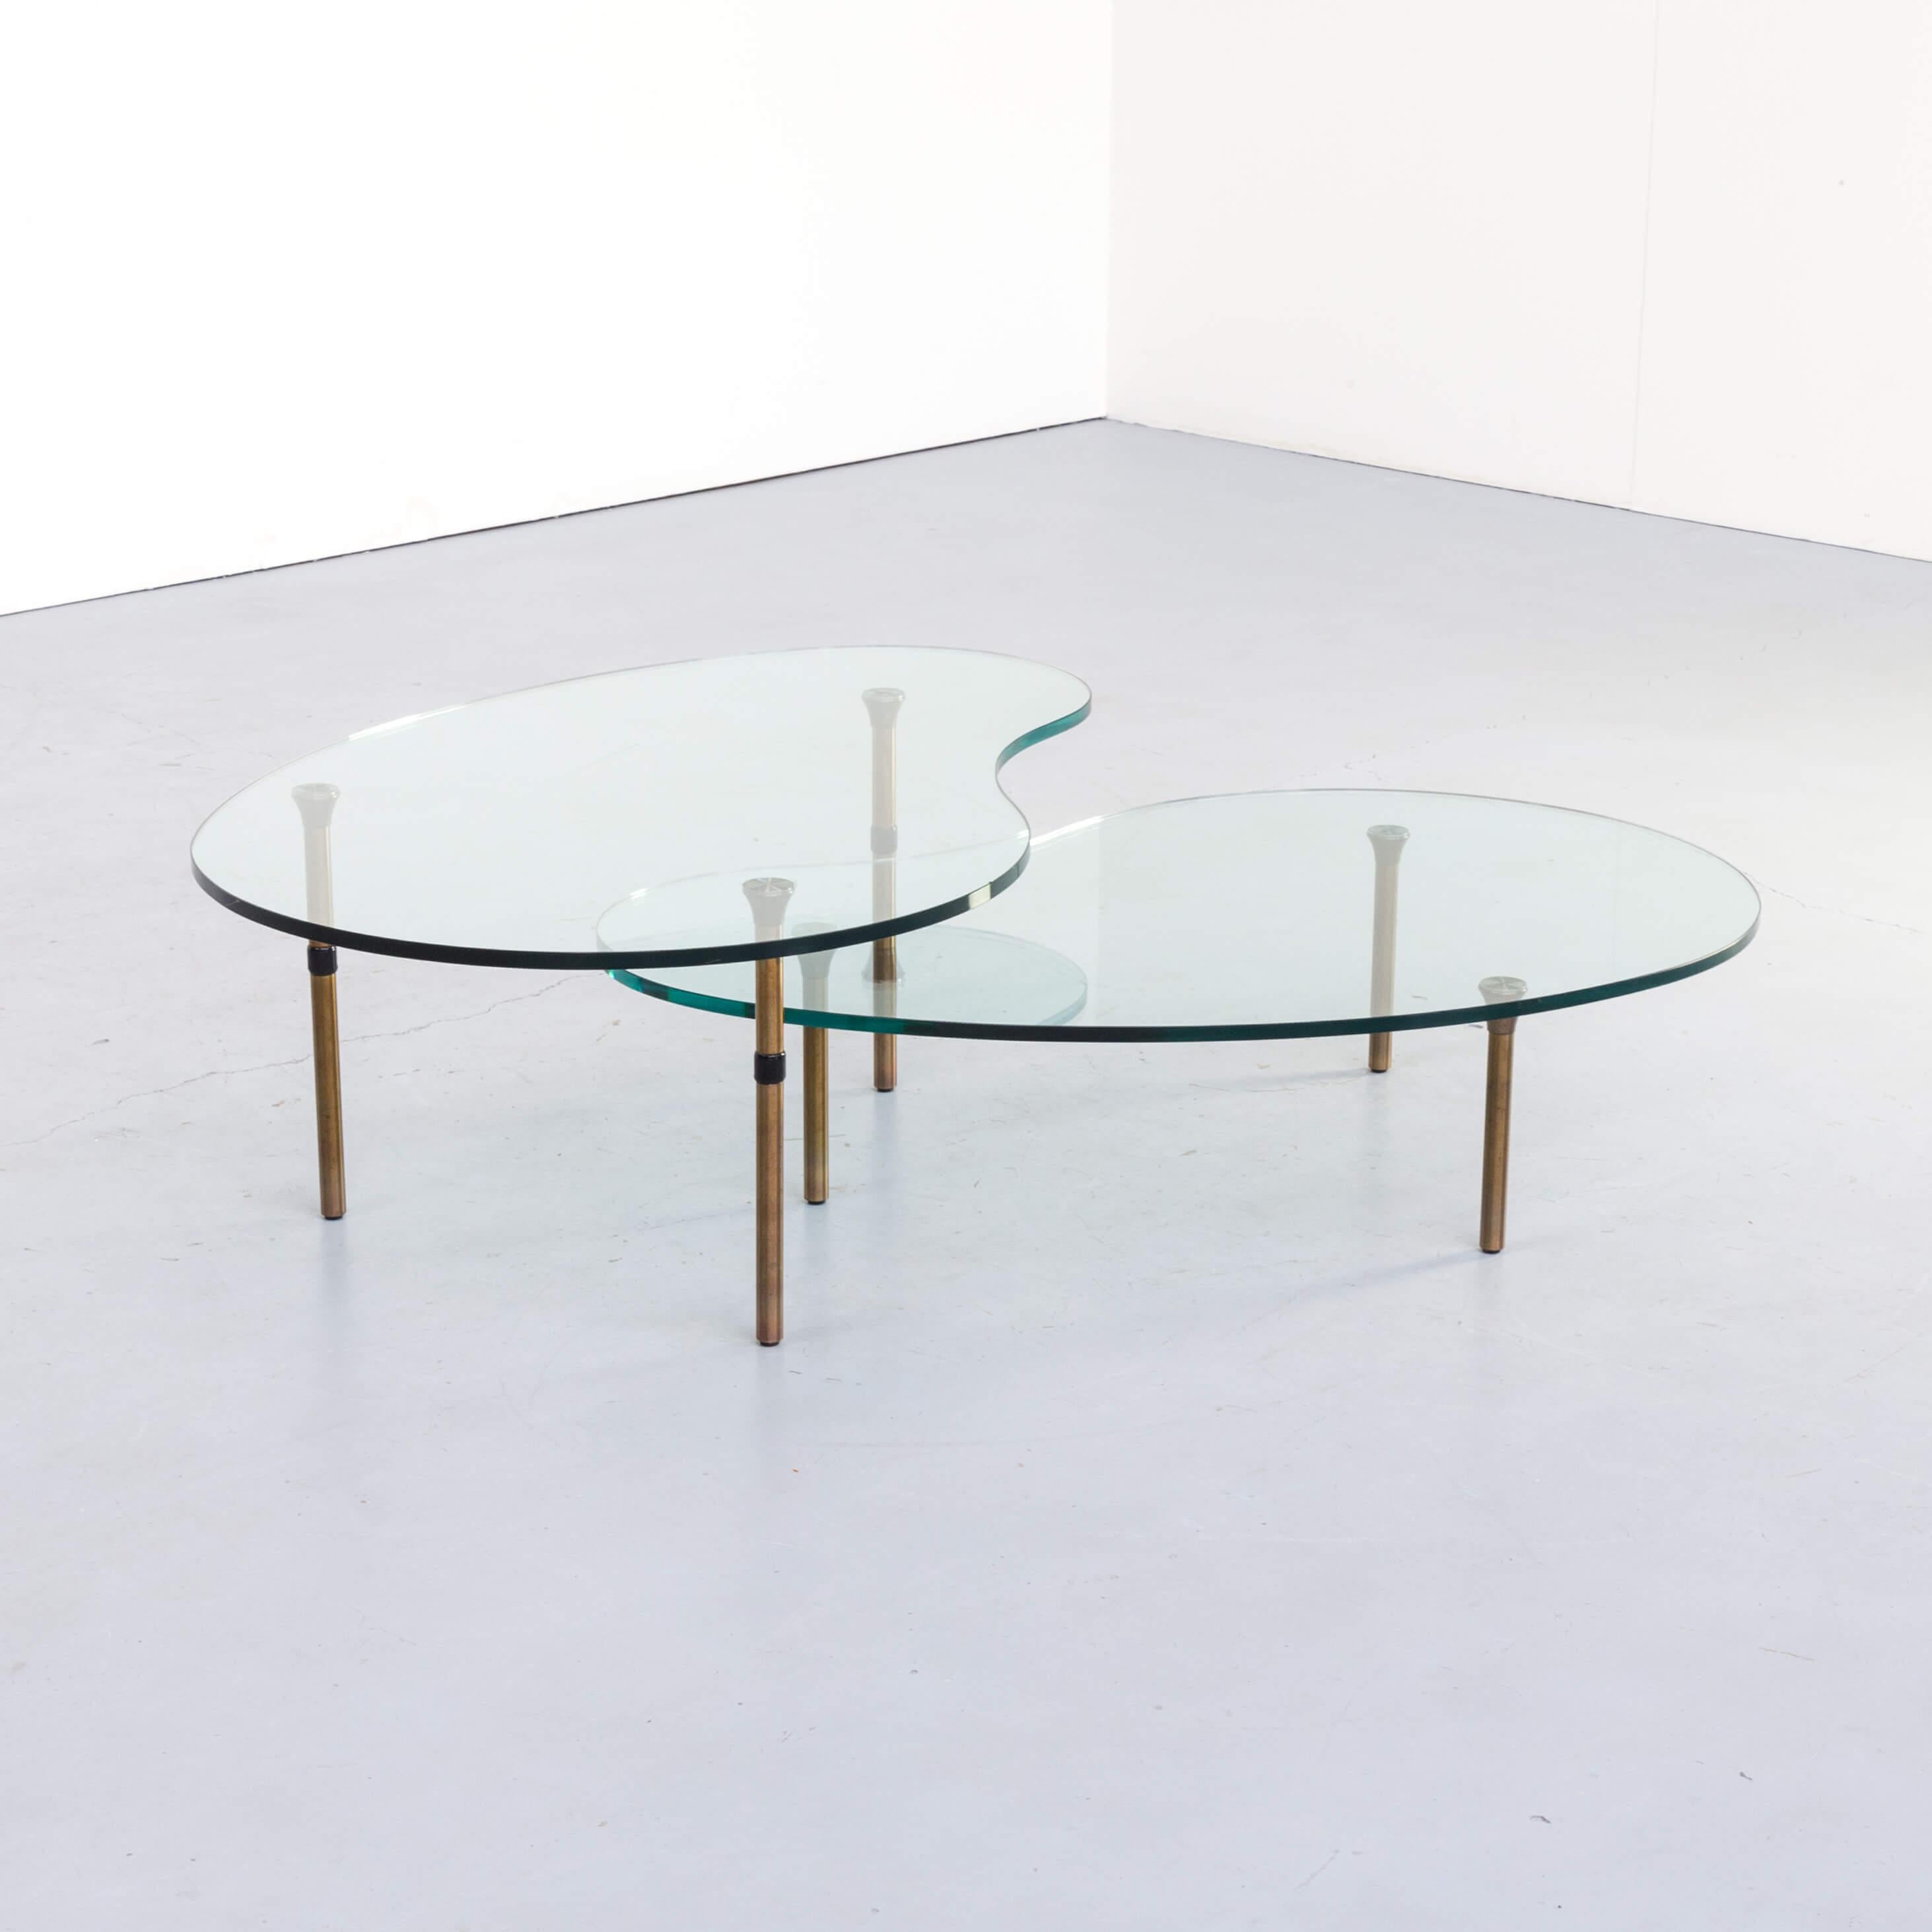 Since 1981 Enzo Mari has been working with Zanotta. The ambo coffee tables are made of glass and brushed steel, which was a fully new technique in 1987 when Mari designed the ambo series ‘glueing’ the feet at the glass tabletop. This set is in good